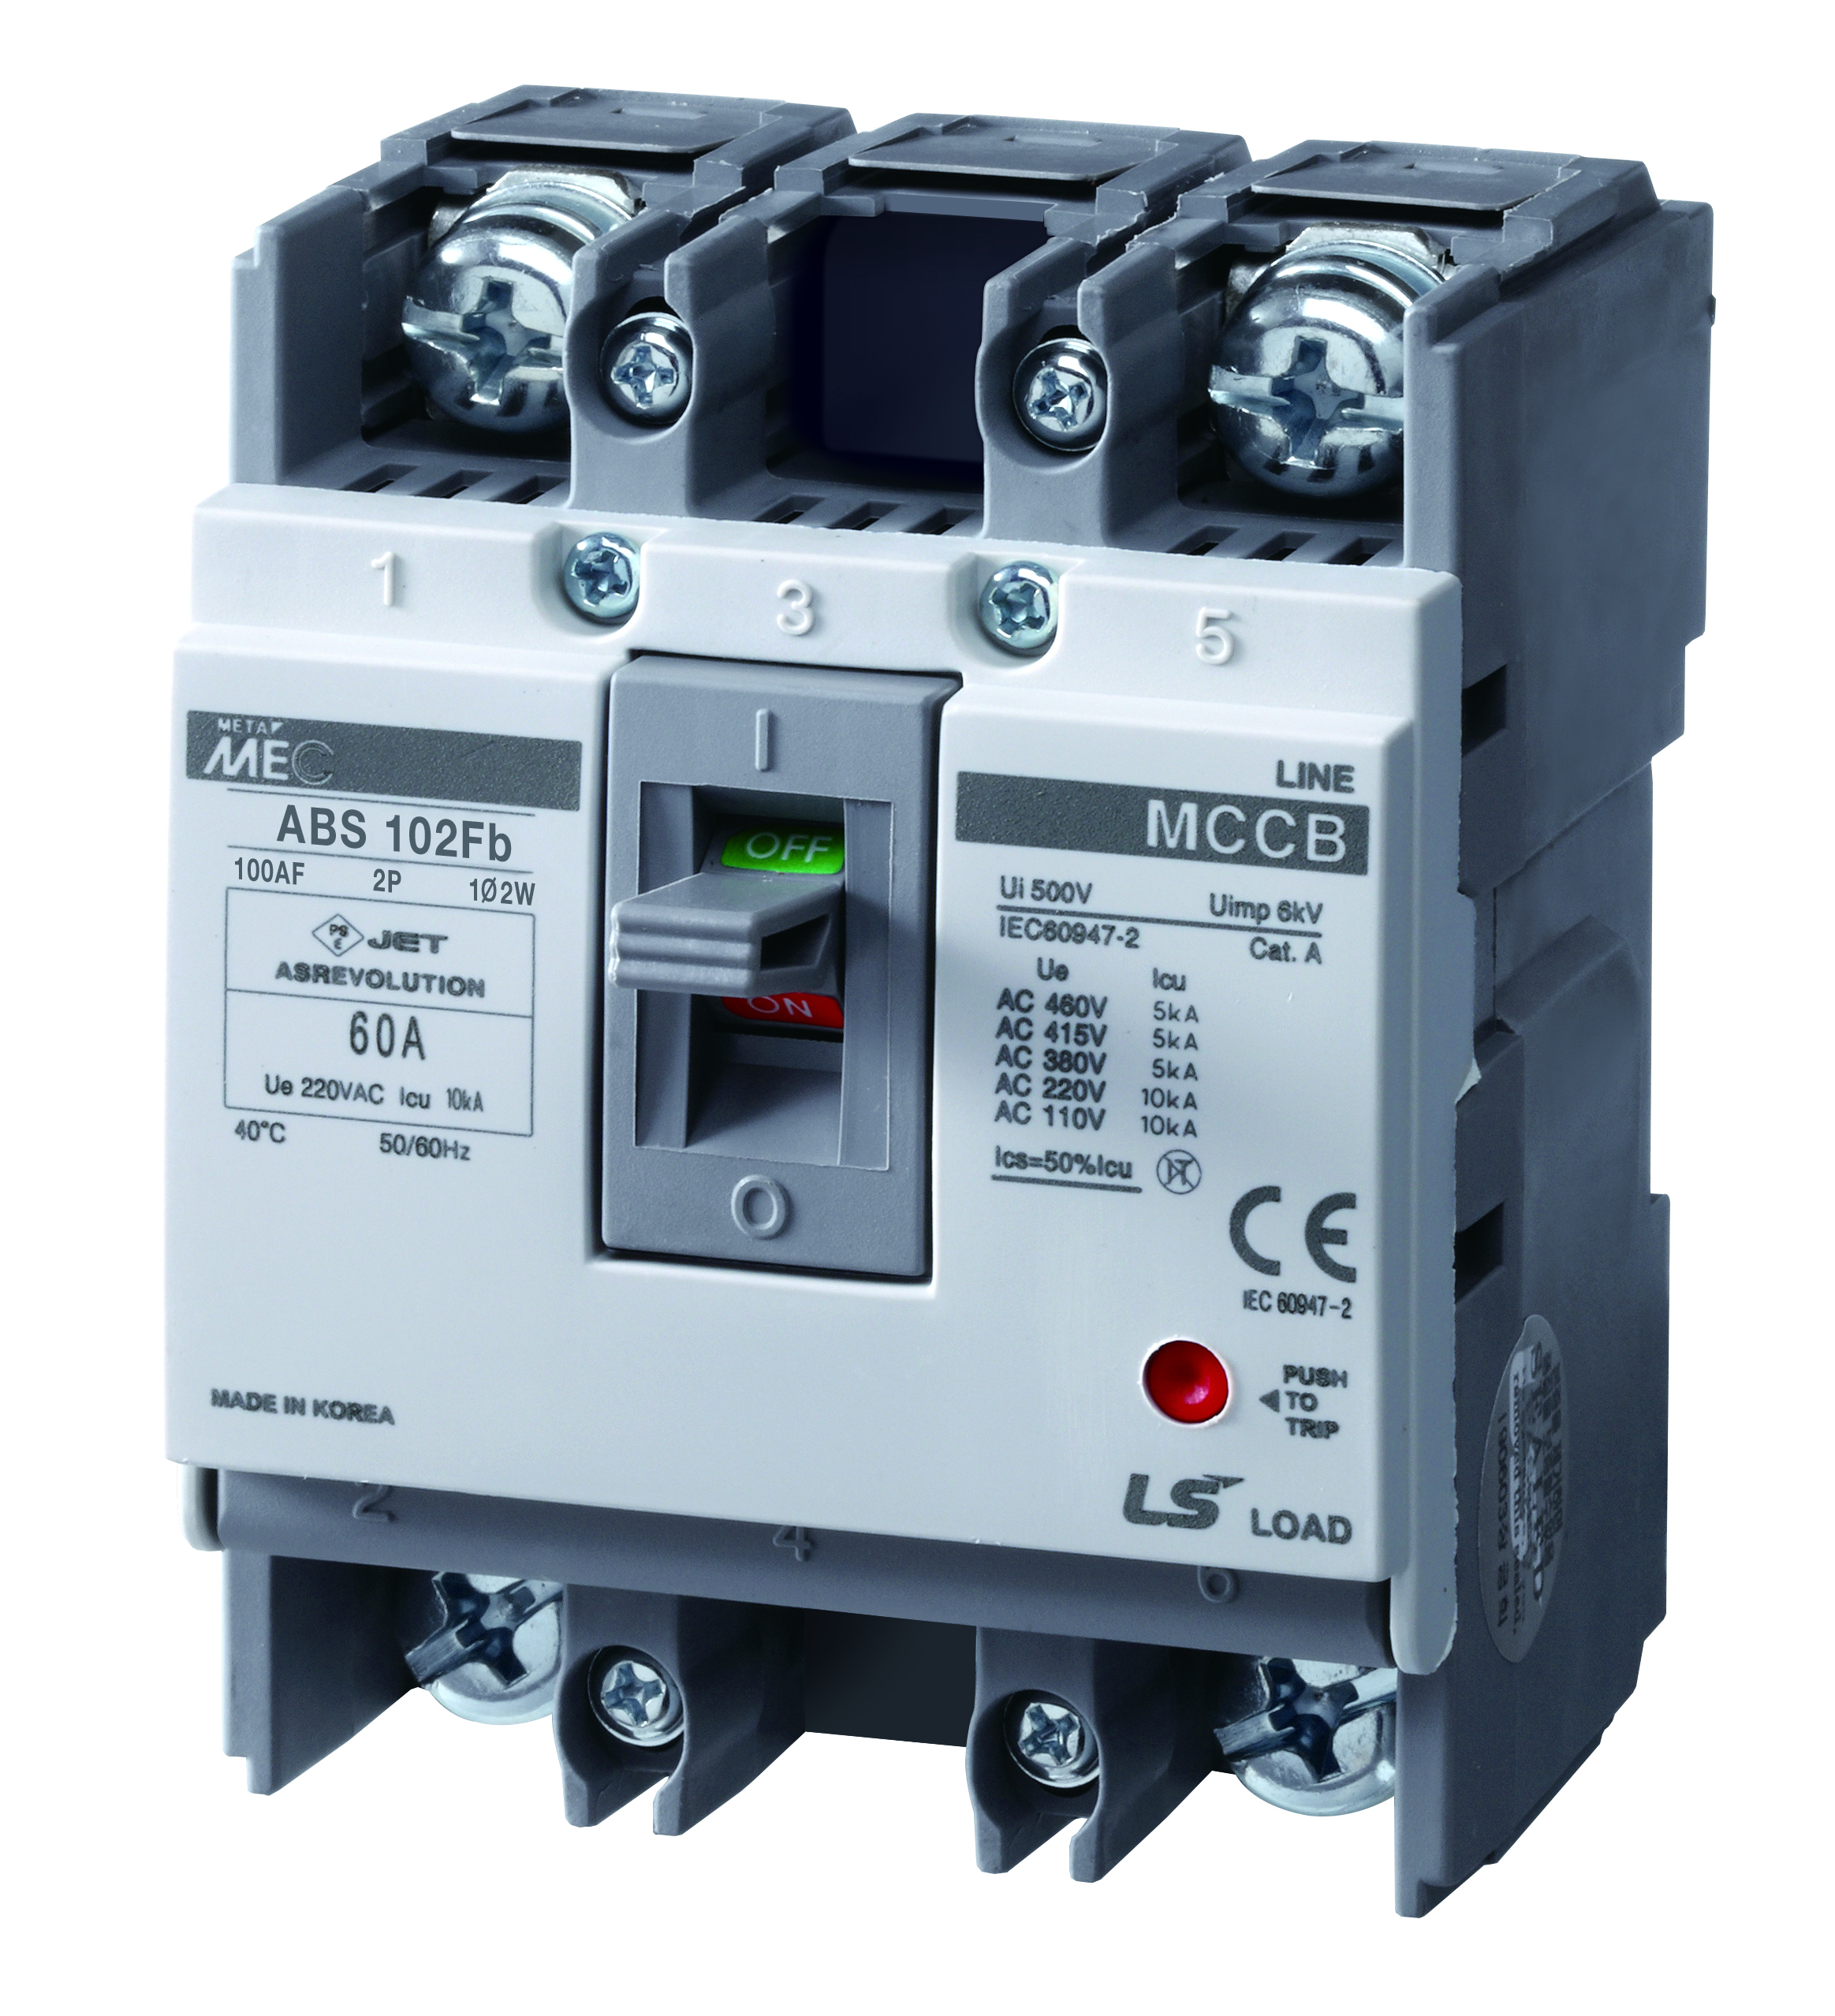 Molded Case Circuit Breakers - Fuseless, ABS Series, DIN Rail Mounting ABS32FB-15A